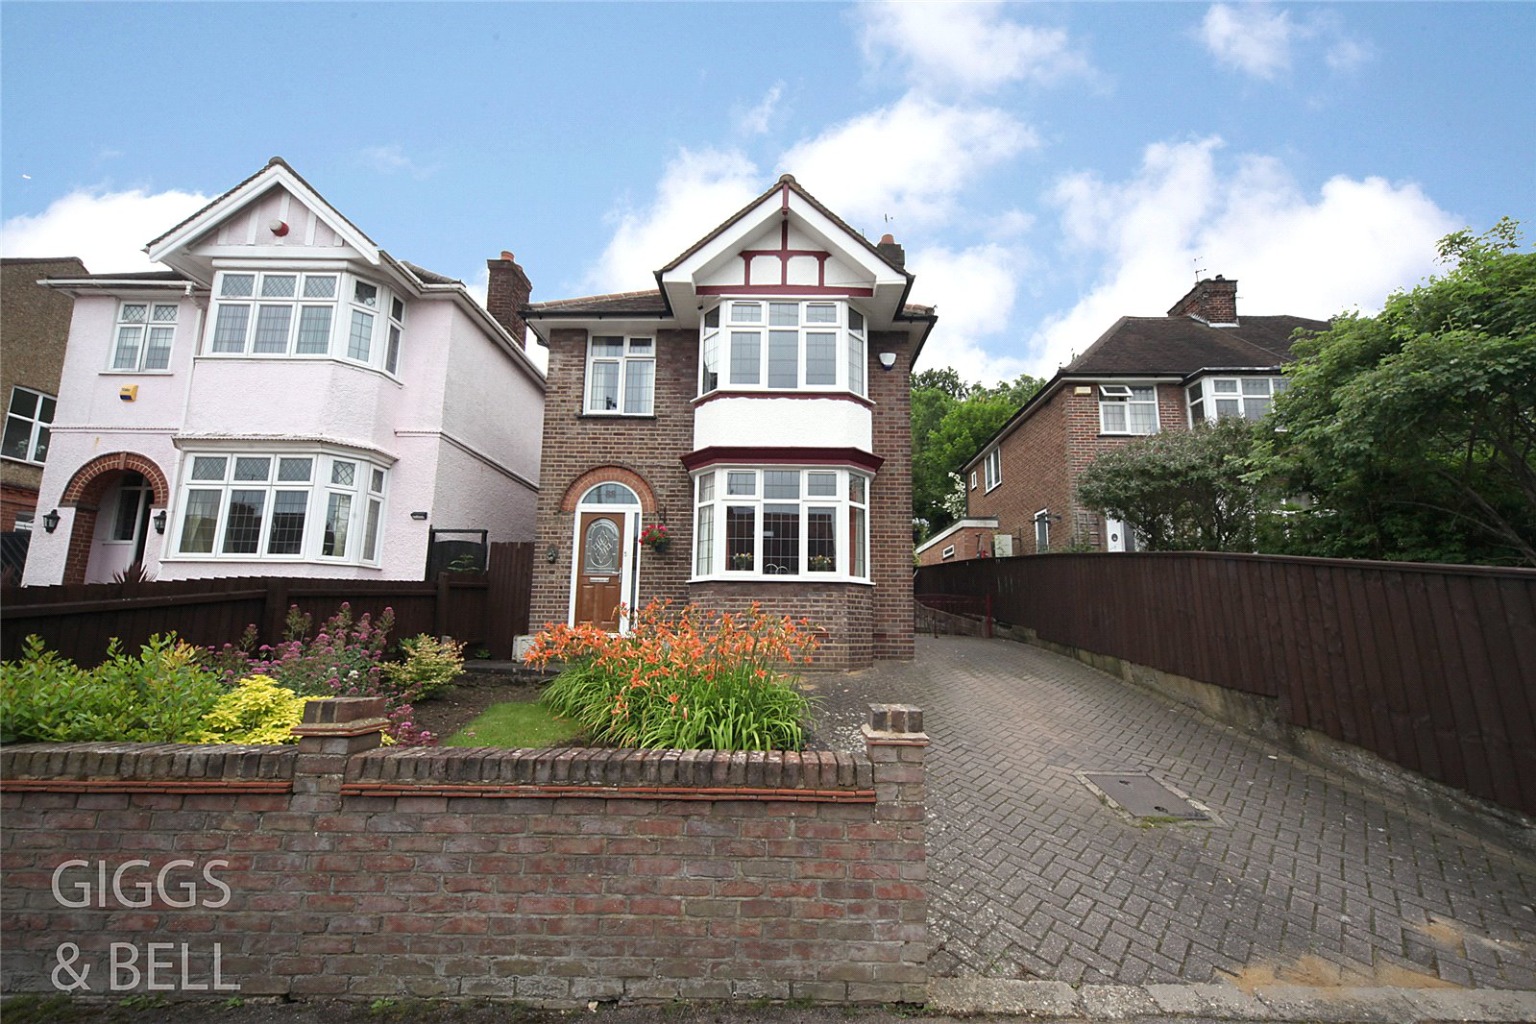 3 bed detached house for sale in Wardown Crescent, Luton 0